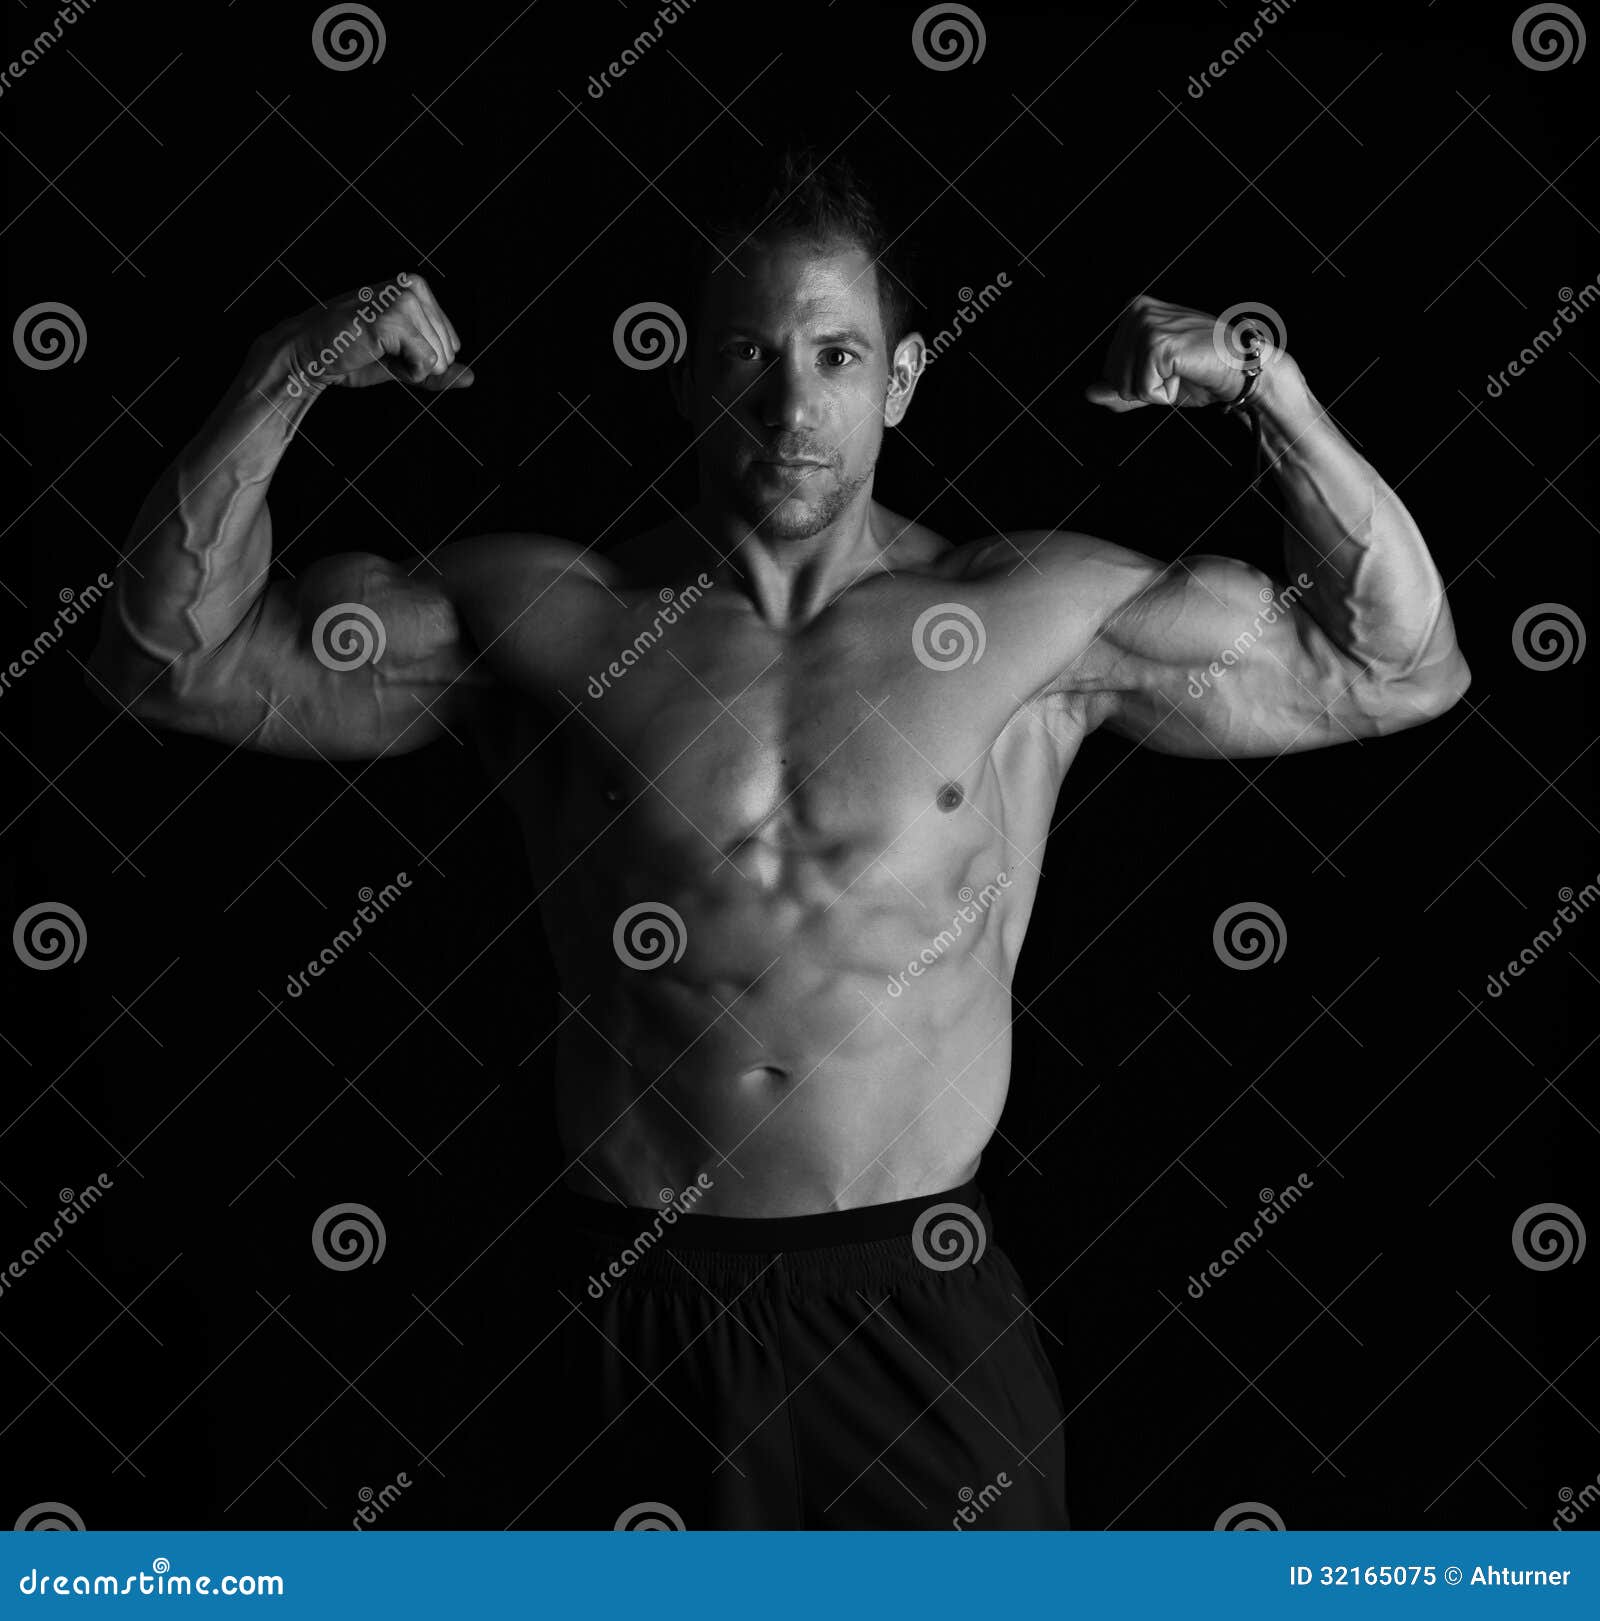 Big Guns stock image. Image of athletic, flexing, attractive - 32165075